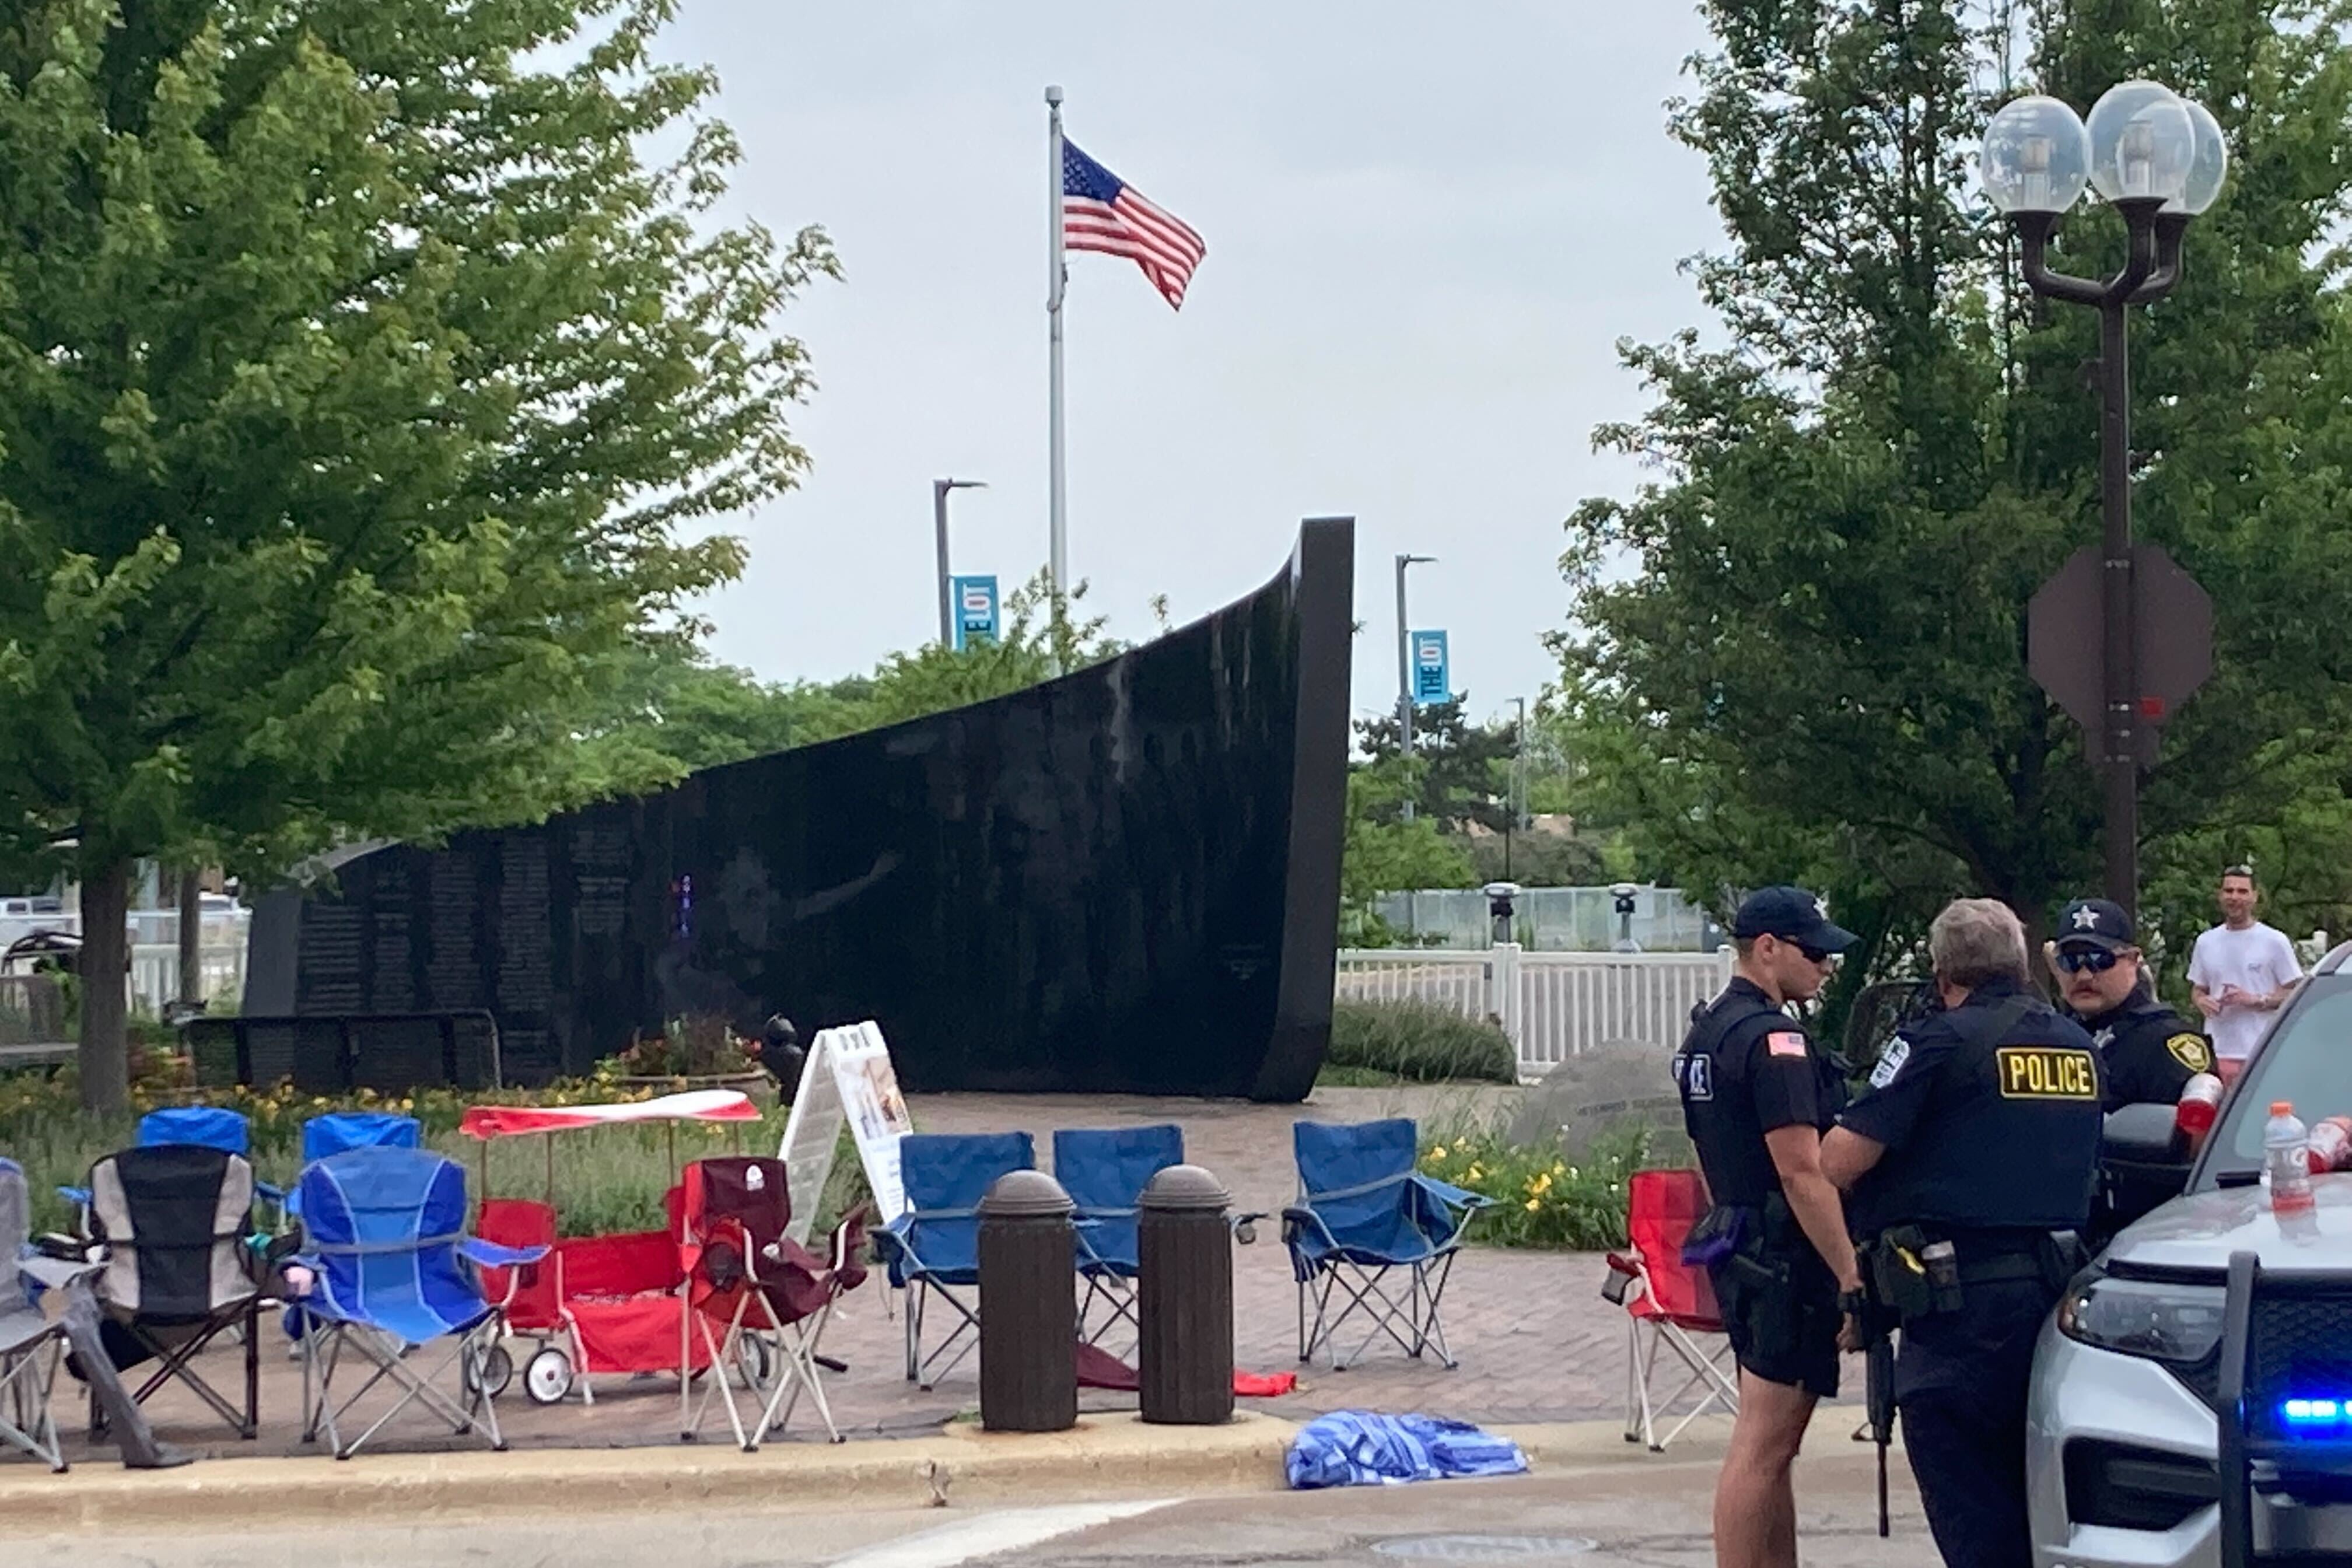 More abandoned chairs, and a veterans memorials, and police officers gathering.